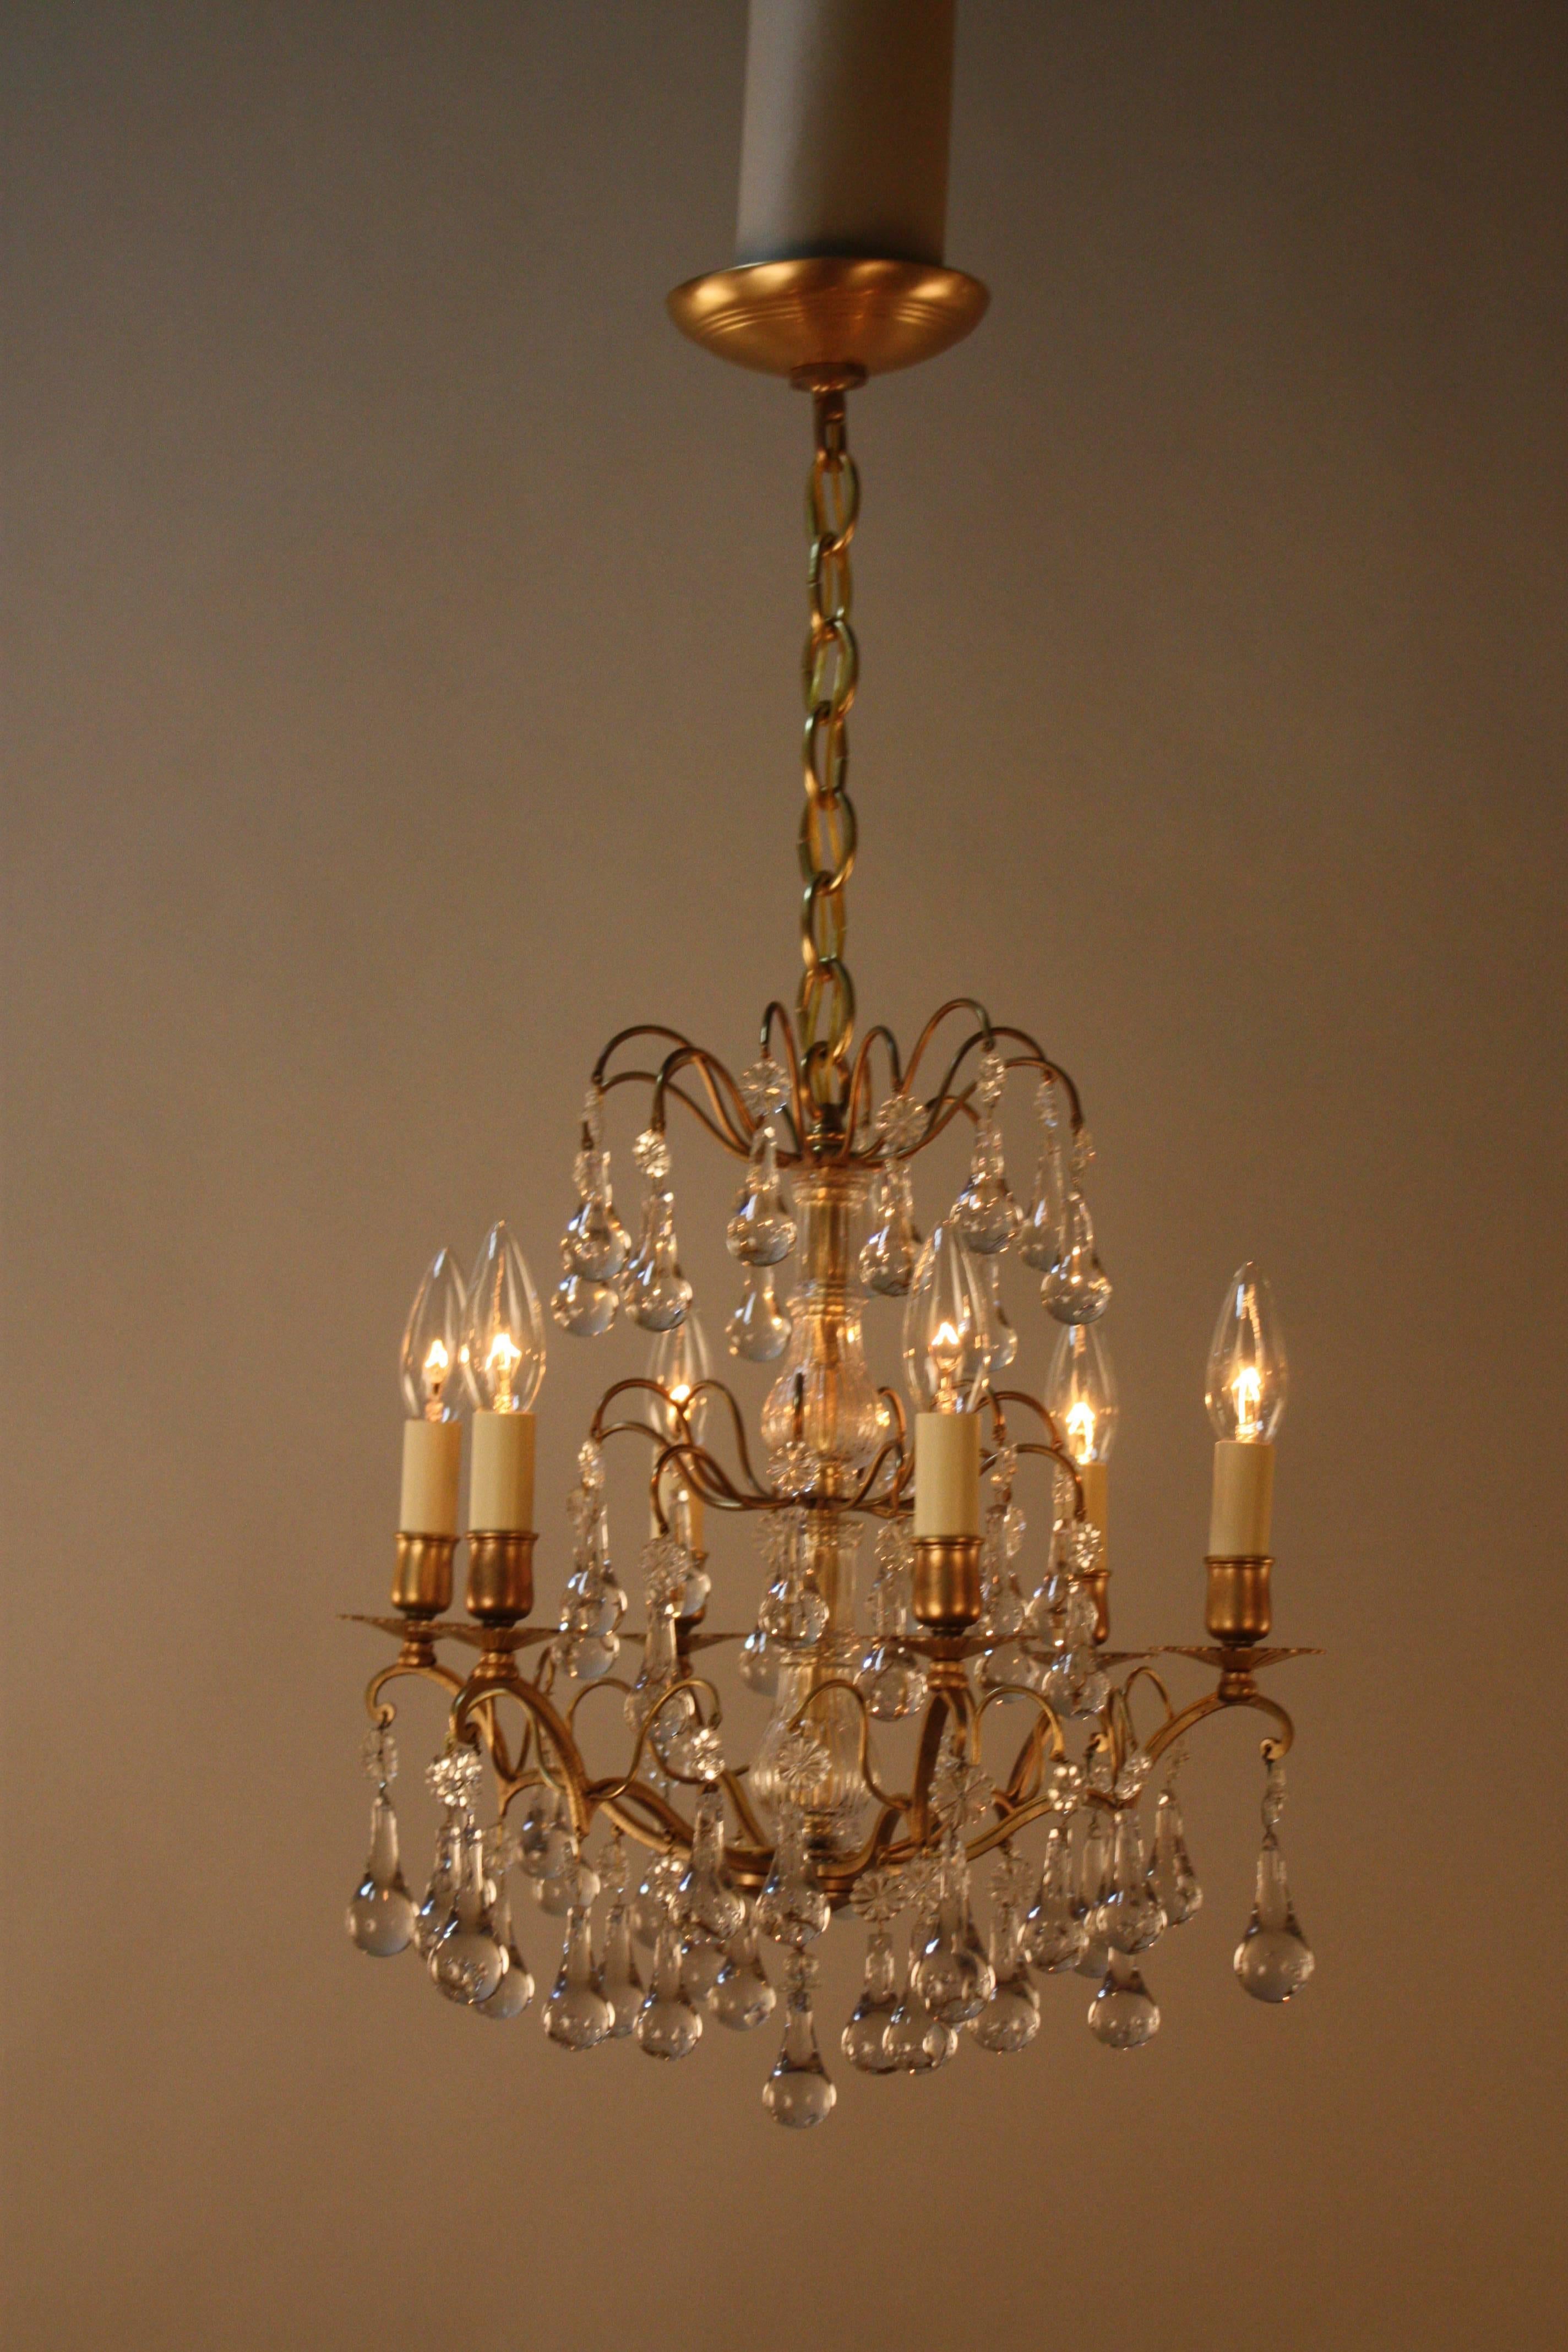 Elegant six-light bronze chandelier with rain drop crystal.
Height: Fully installed with one link of chain and canopy 21